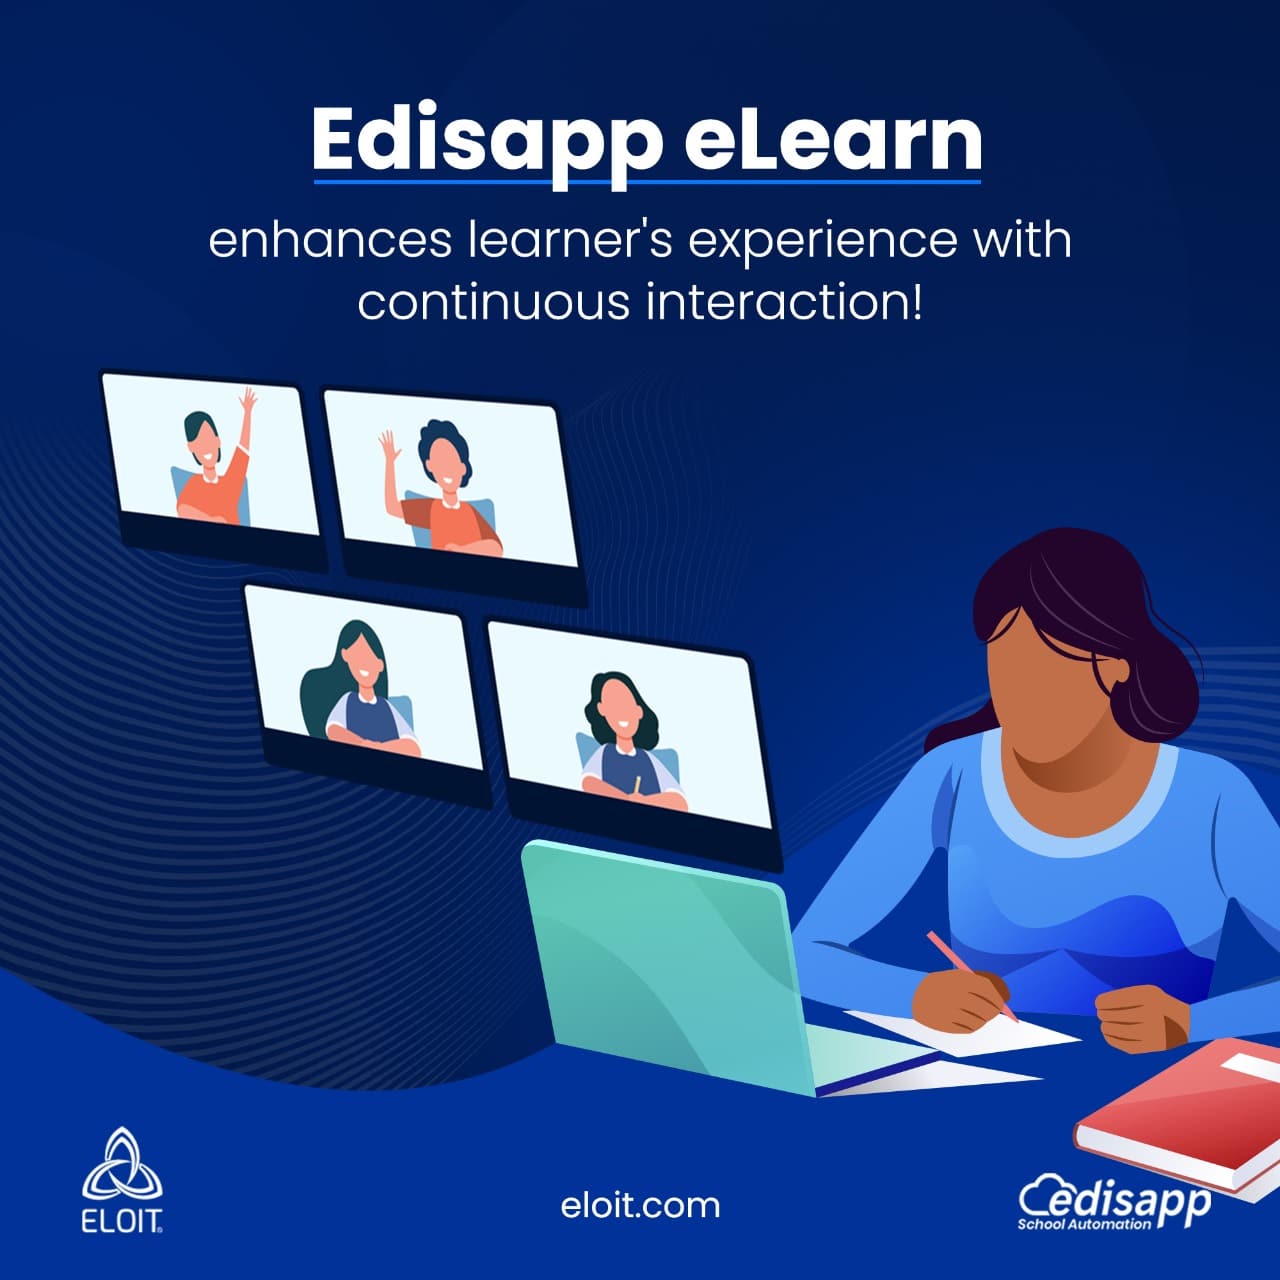 Edisapp eLearn Learning Management System – Enhances learner’s experience with continuous interactions!